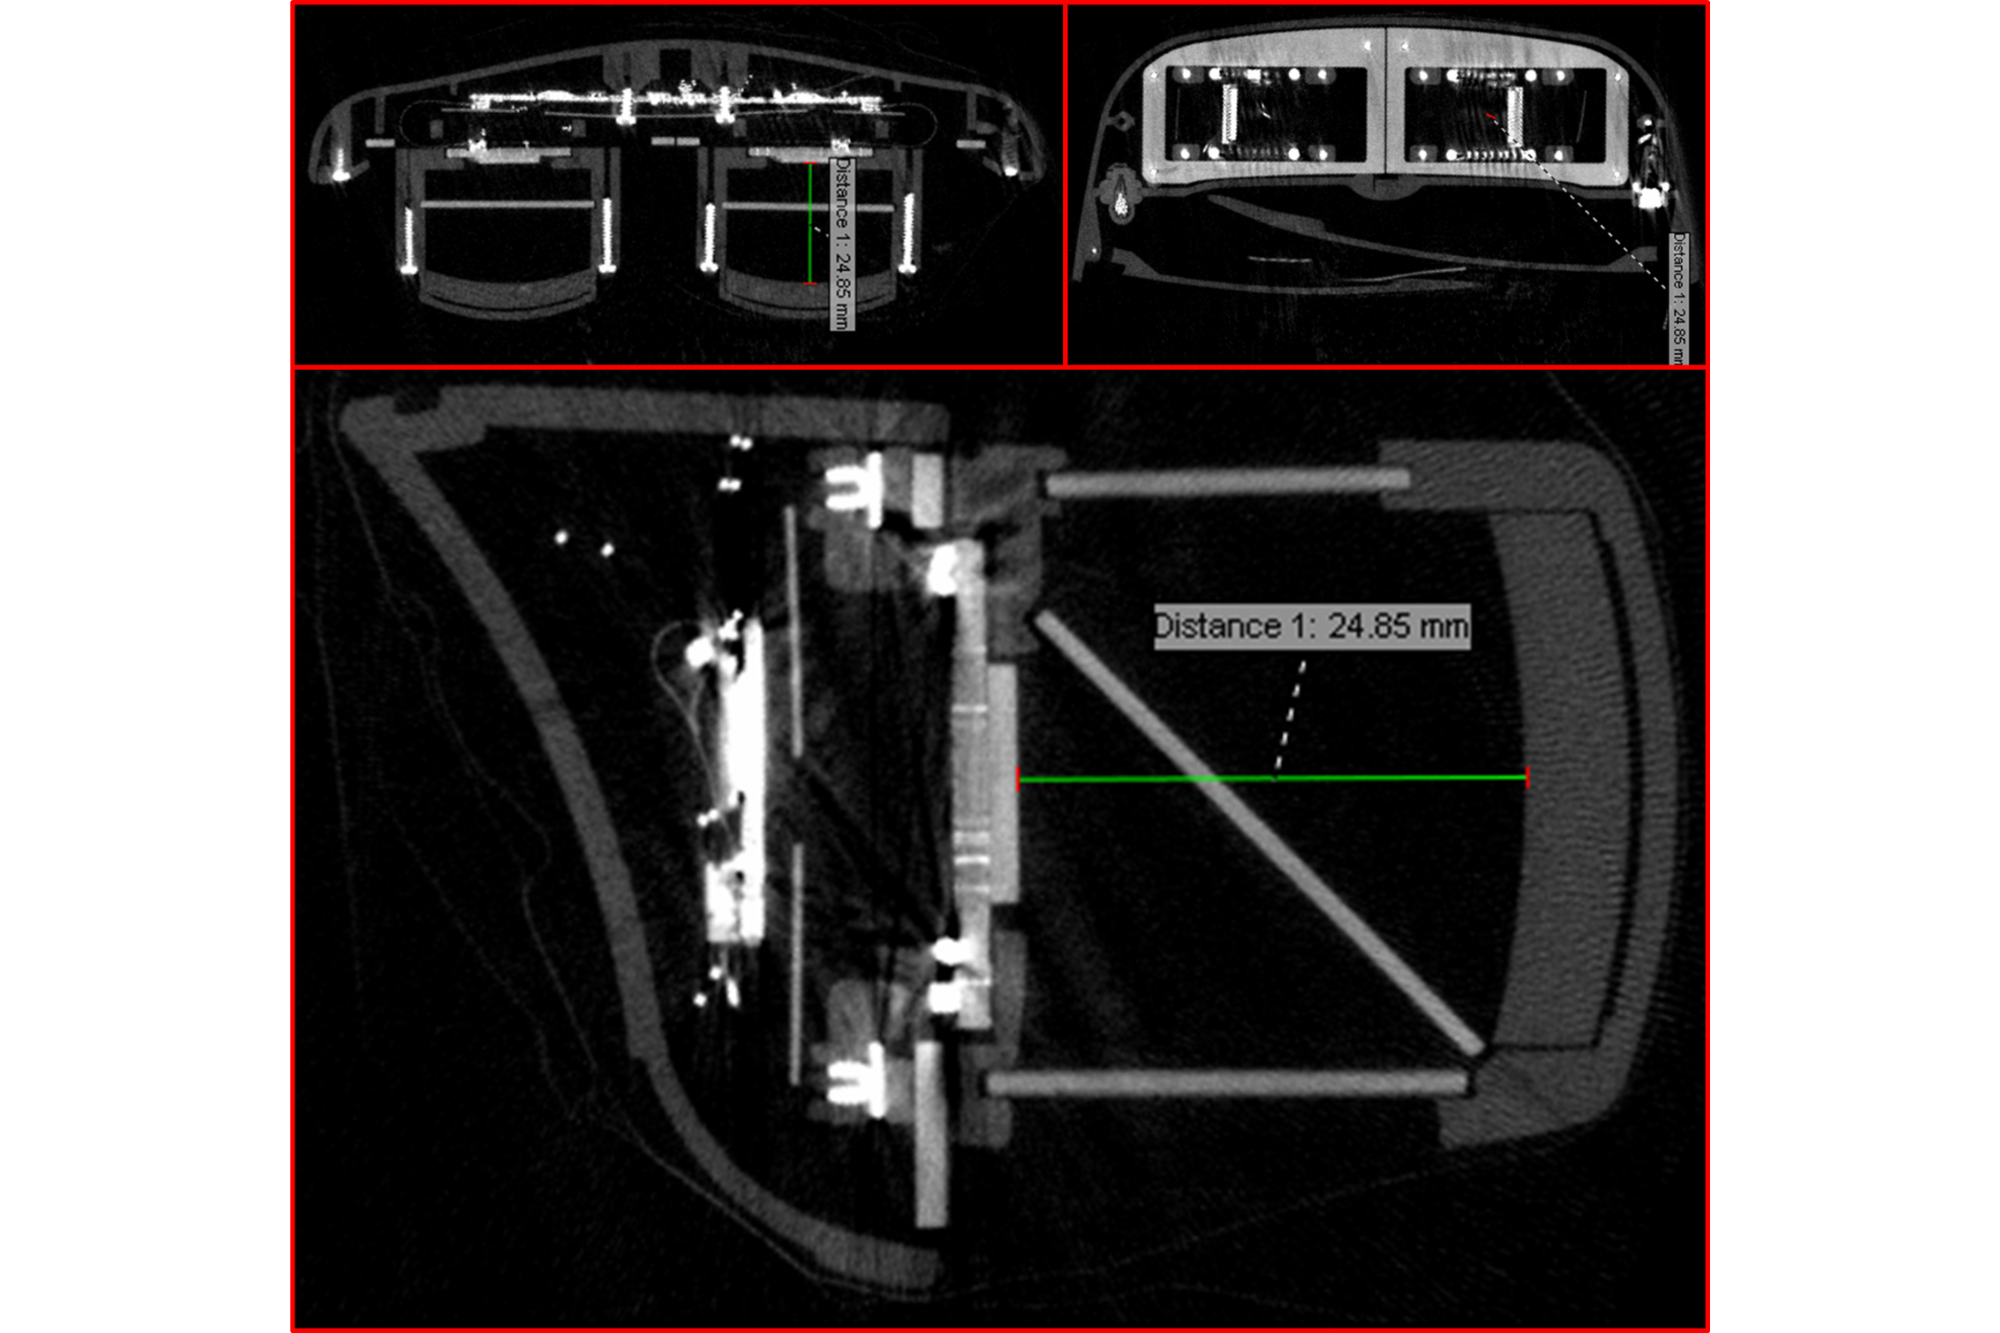 Analysis of the assembly condition of VR glasses using computer tomography